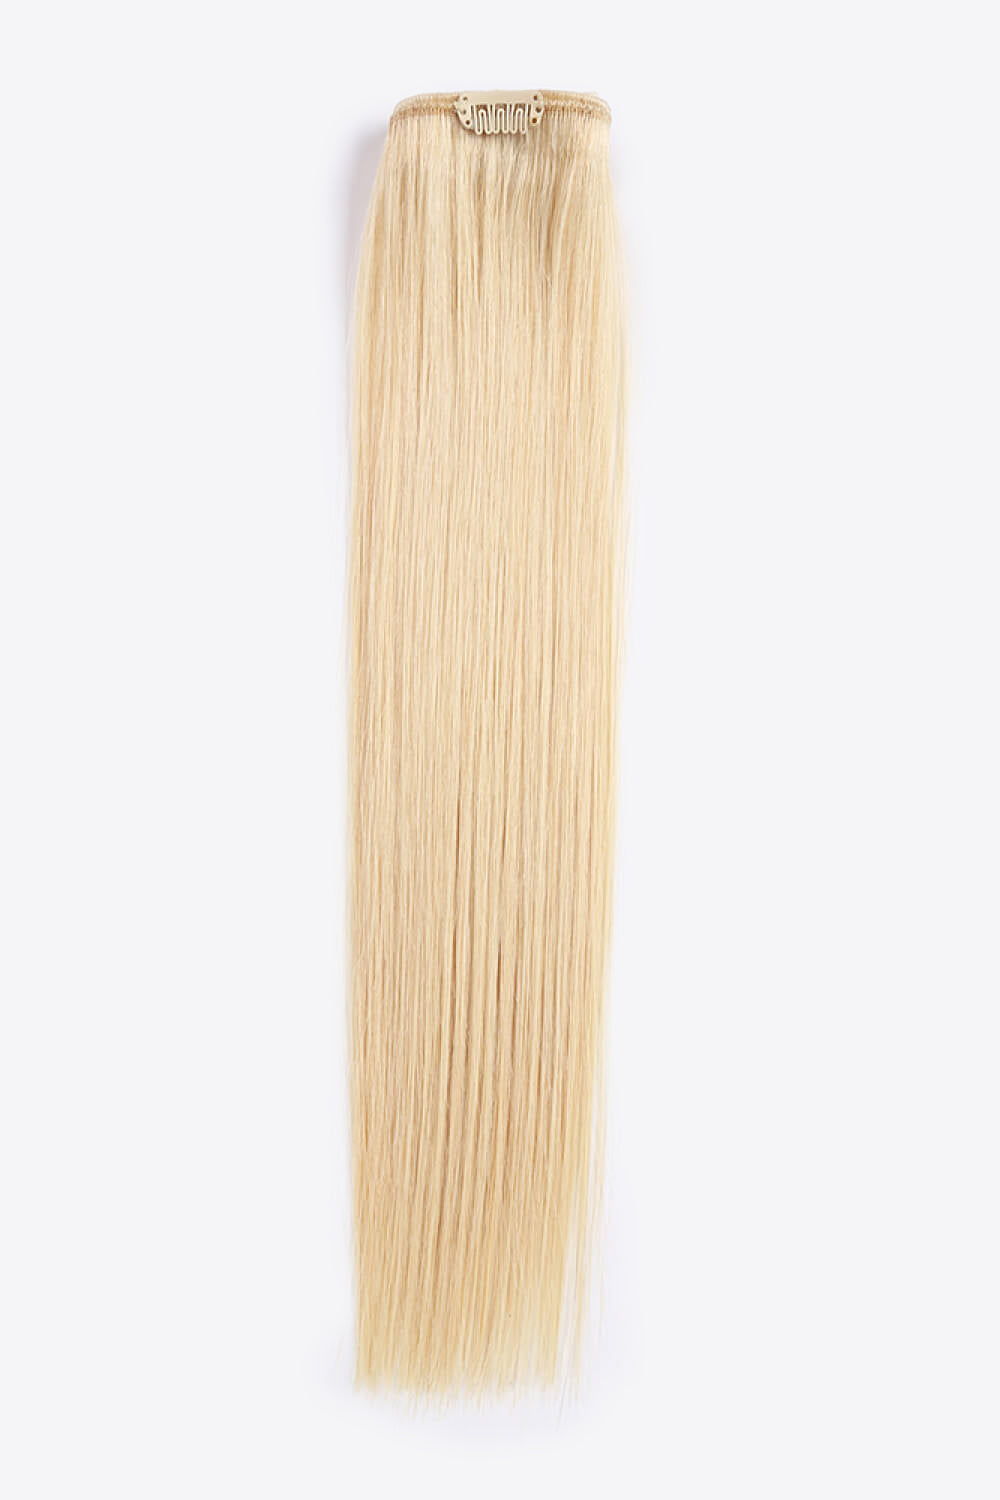 16" 110g Clip-in Hair Extensions Indian Human Hair in Blonde - AllIn Computer